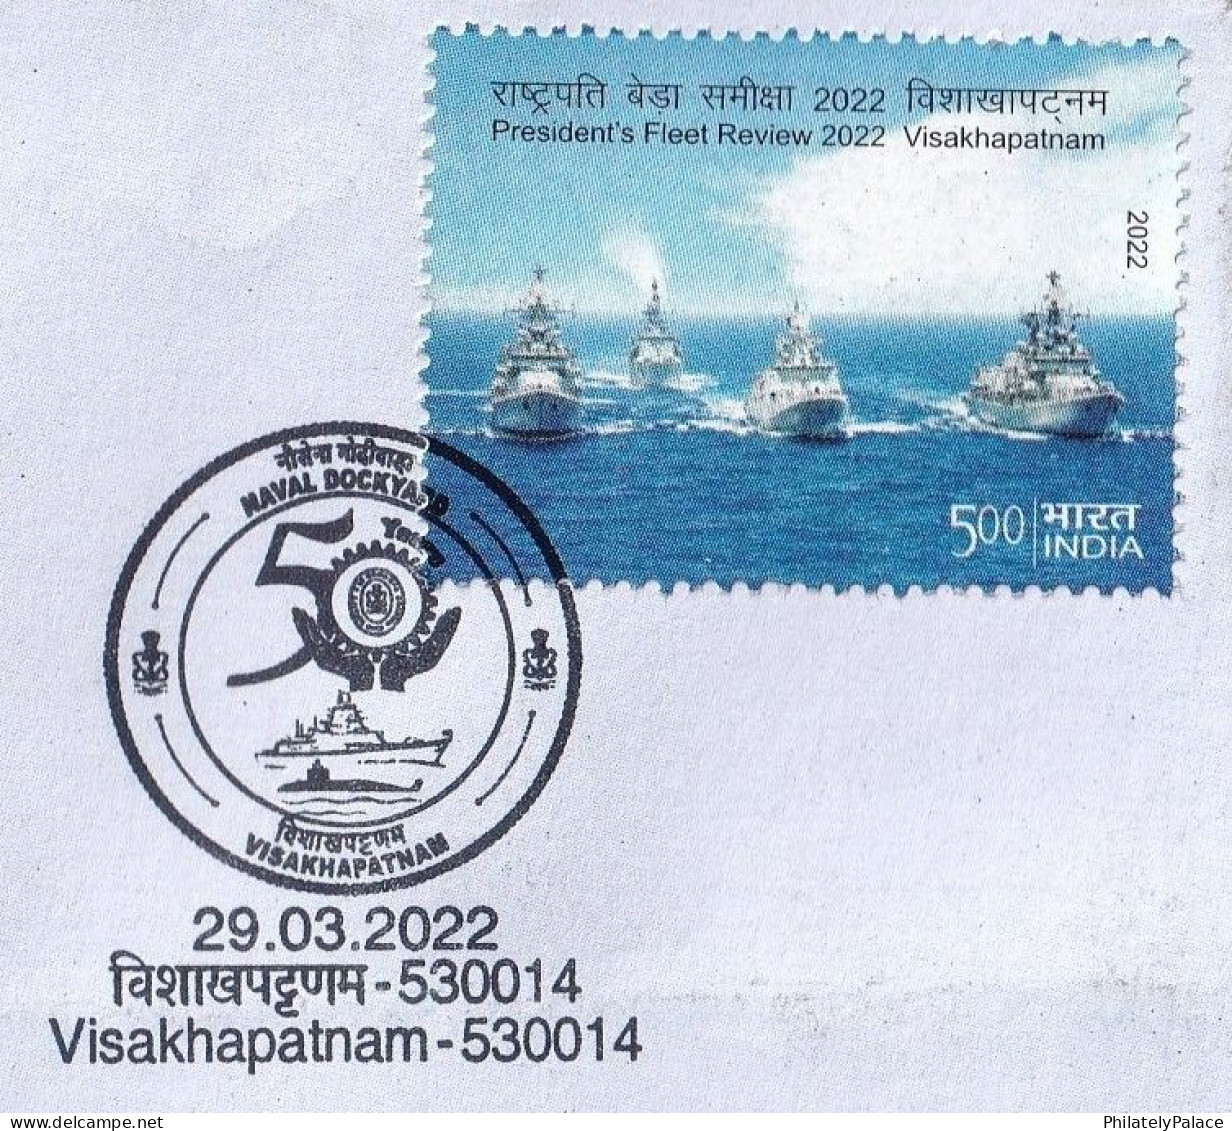 India 2022 Naval Dockyard Visakhapatnam Qulity Ship, Indian Navy, War, Sp Cover (**) Inde Indien - Lettres & Documents